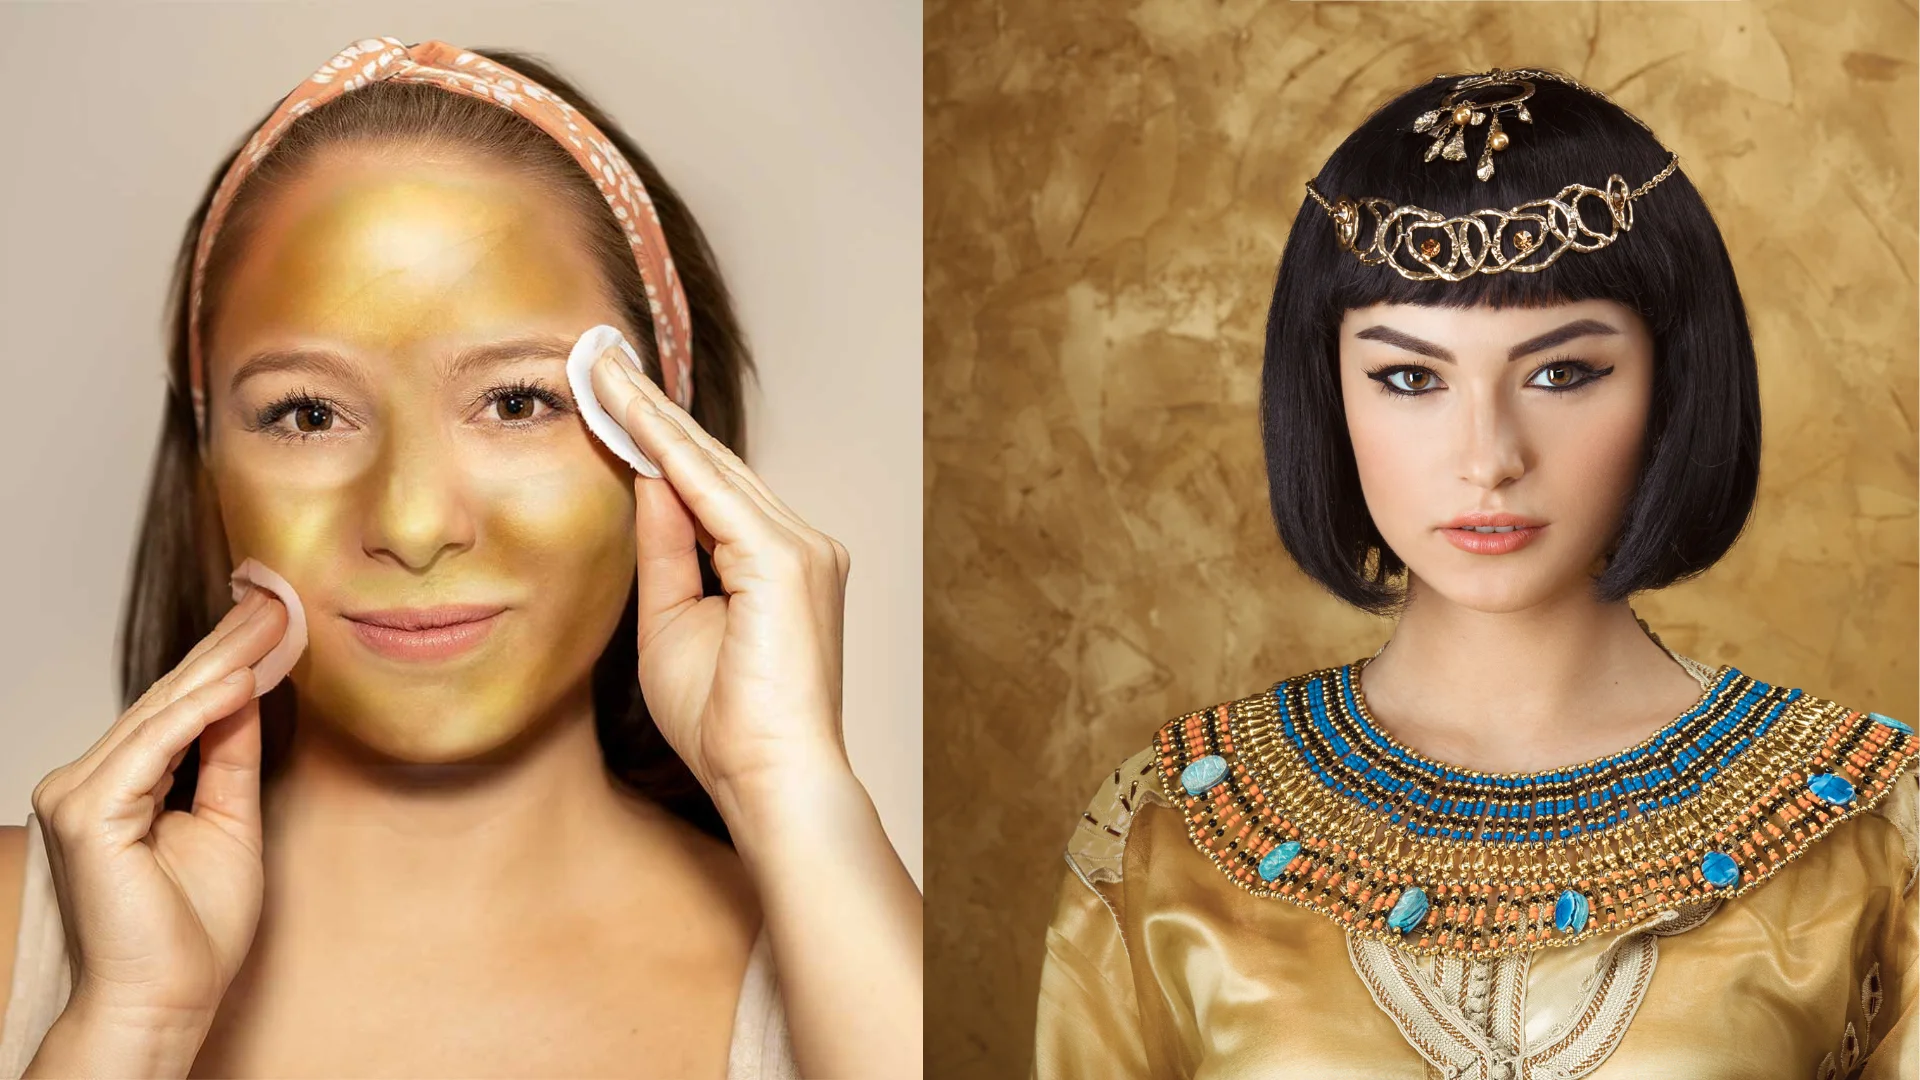 Cleopatra's Beauty Secrets and Modern Solutions